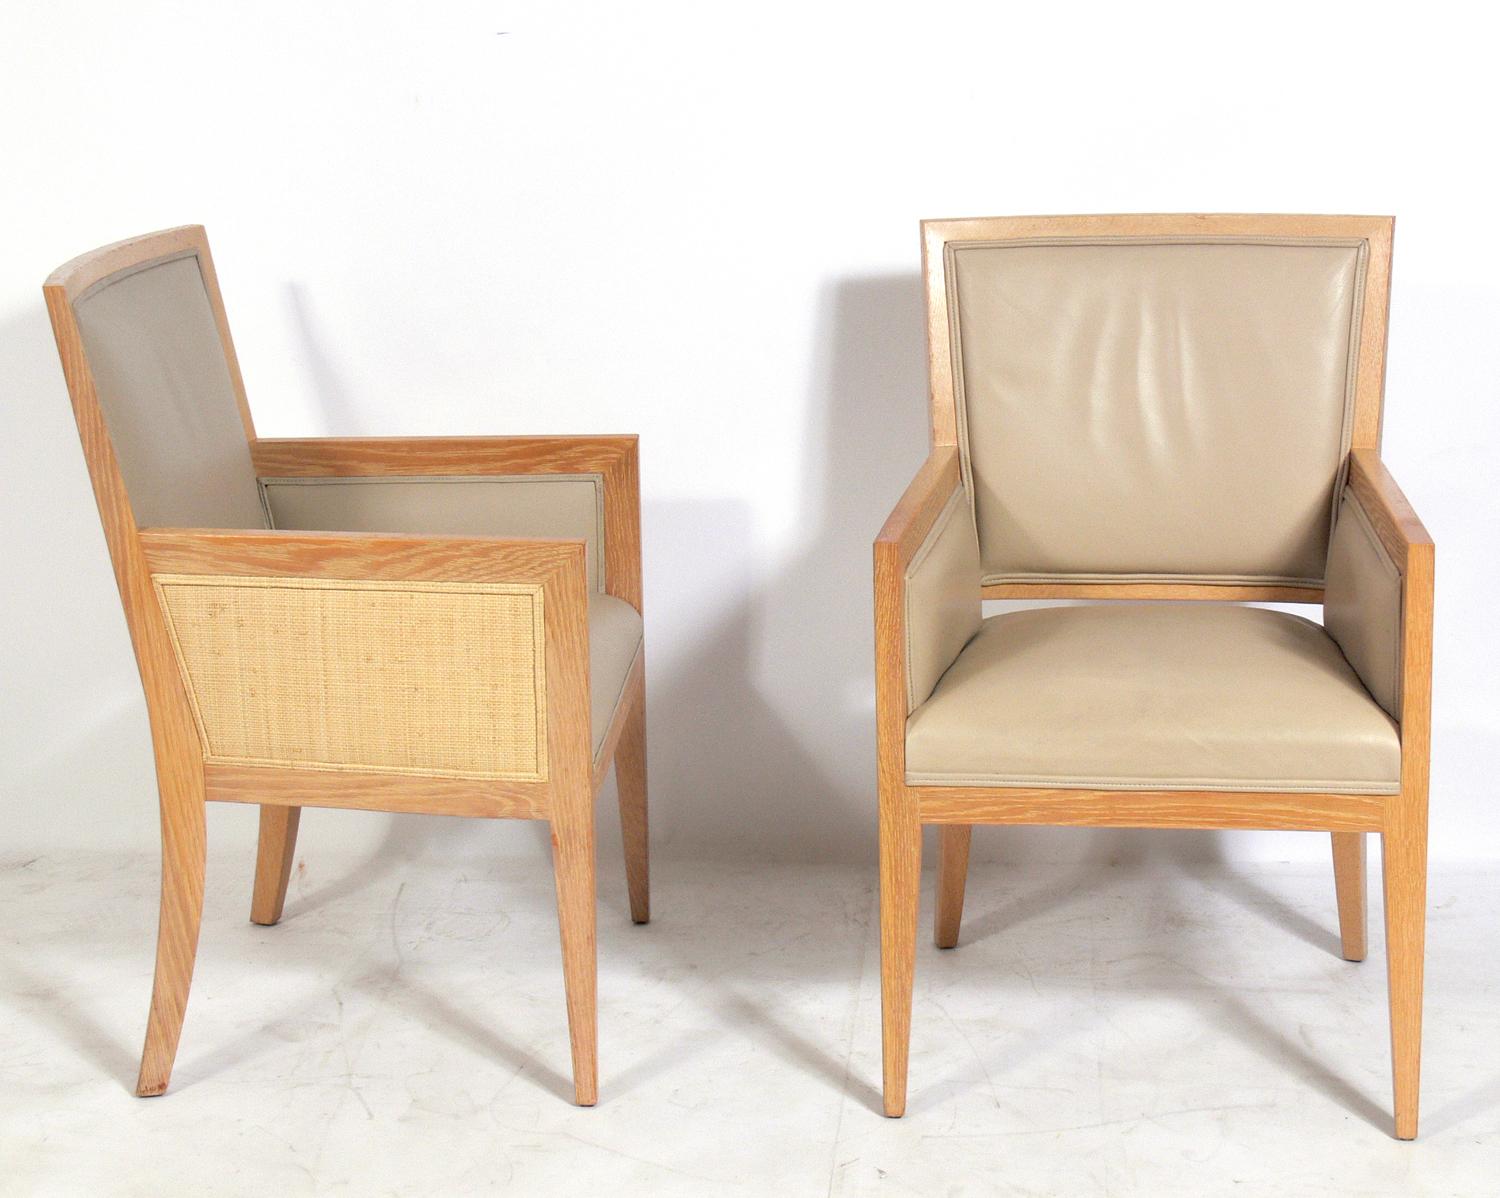 Set of four limed oak caned and leather upholstered dining chairs, originally designed by Jean Michel Frank, circa 1930s. These examples are from a 1990s production by the company Mattaliano. They retain their warm original patina. They are a